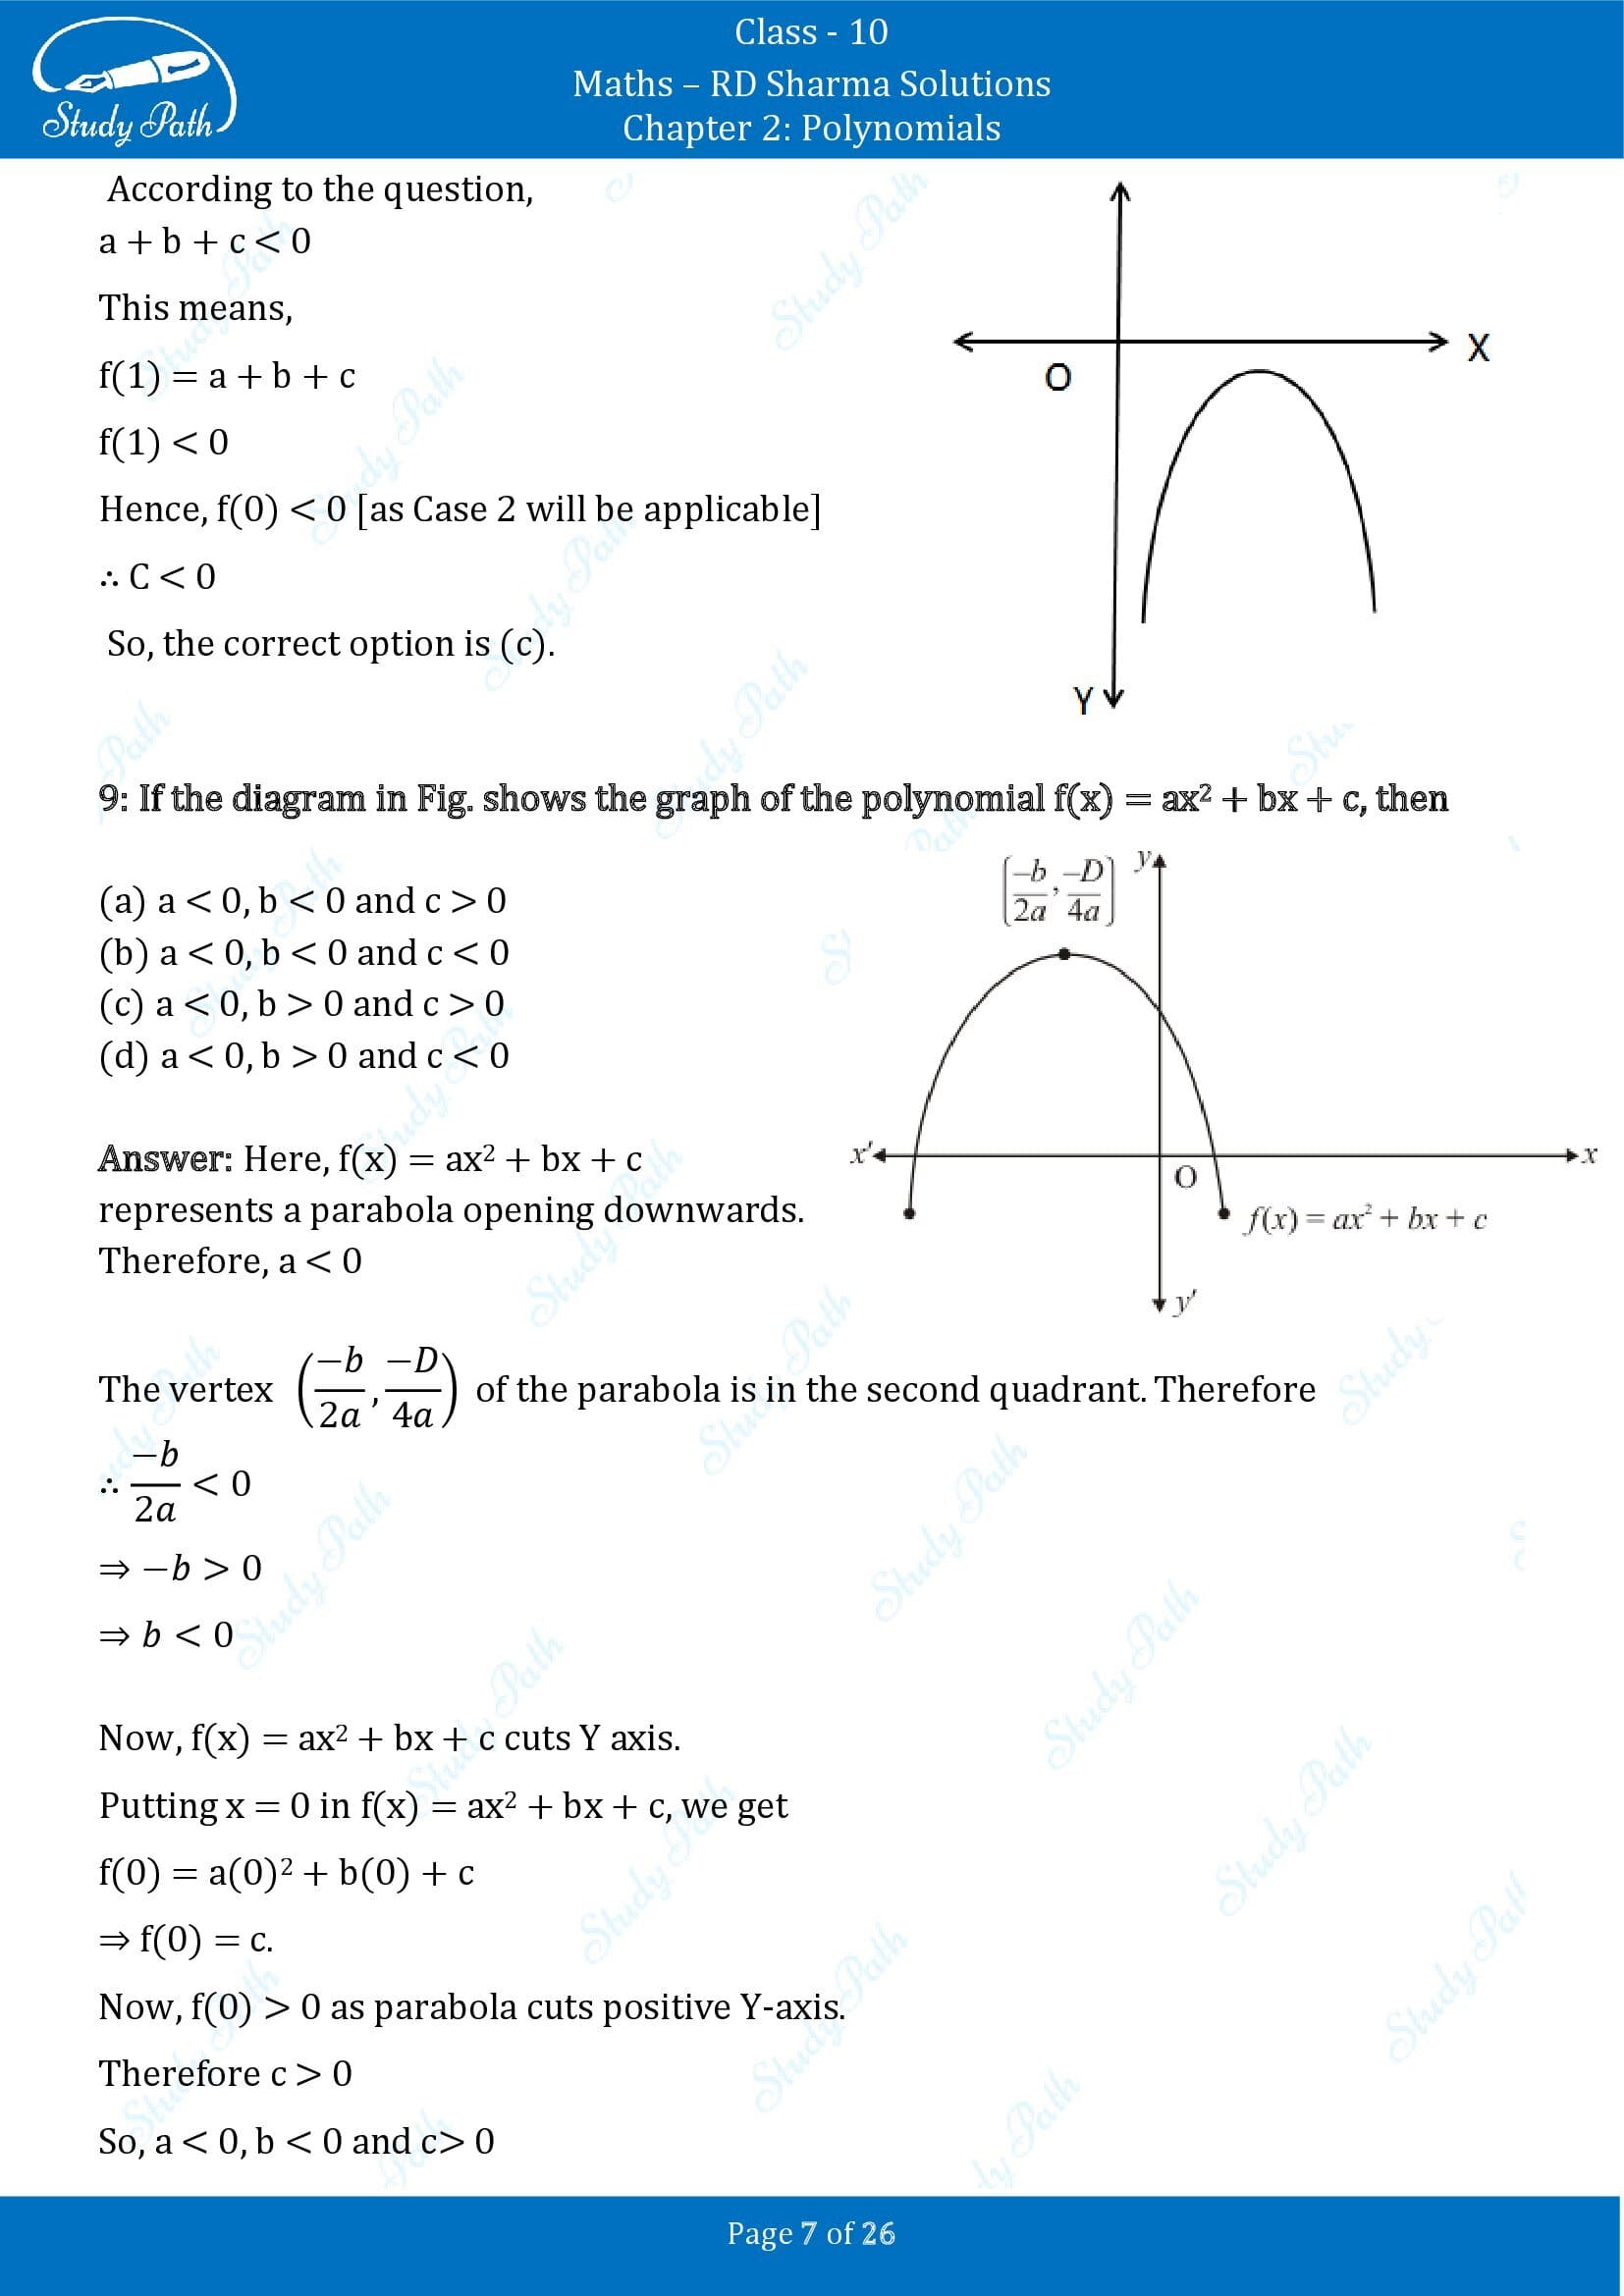 RD Sharma Solutions Class 10 Chapter 2 Polynomials Multiple Choice Questions MCQs 00007